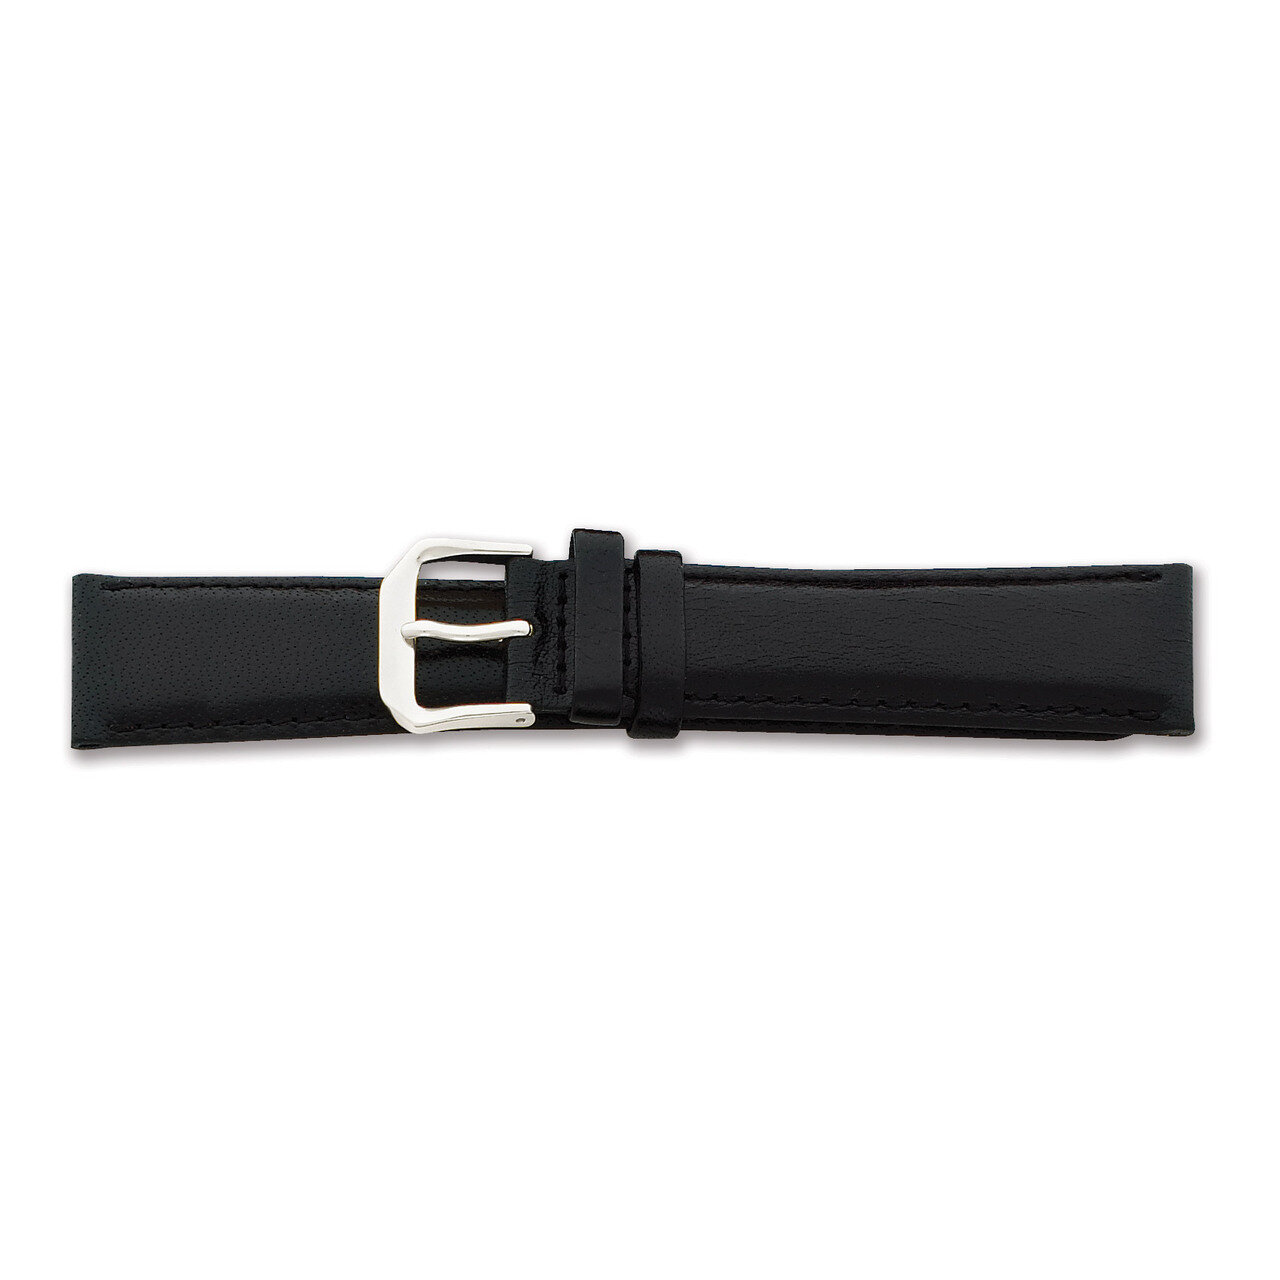 20mm Black Long Smooth Leather Watch Band 8.5 Inch Silver-tone Buckle BAW8L-20